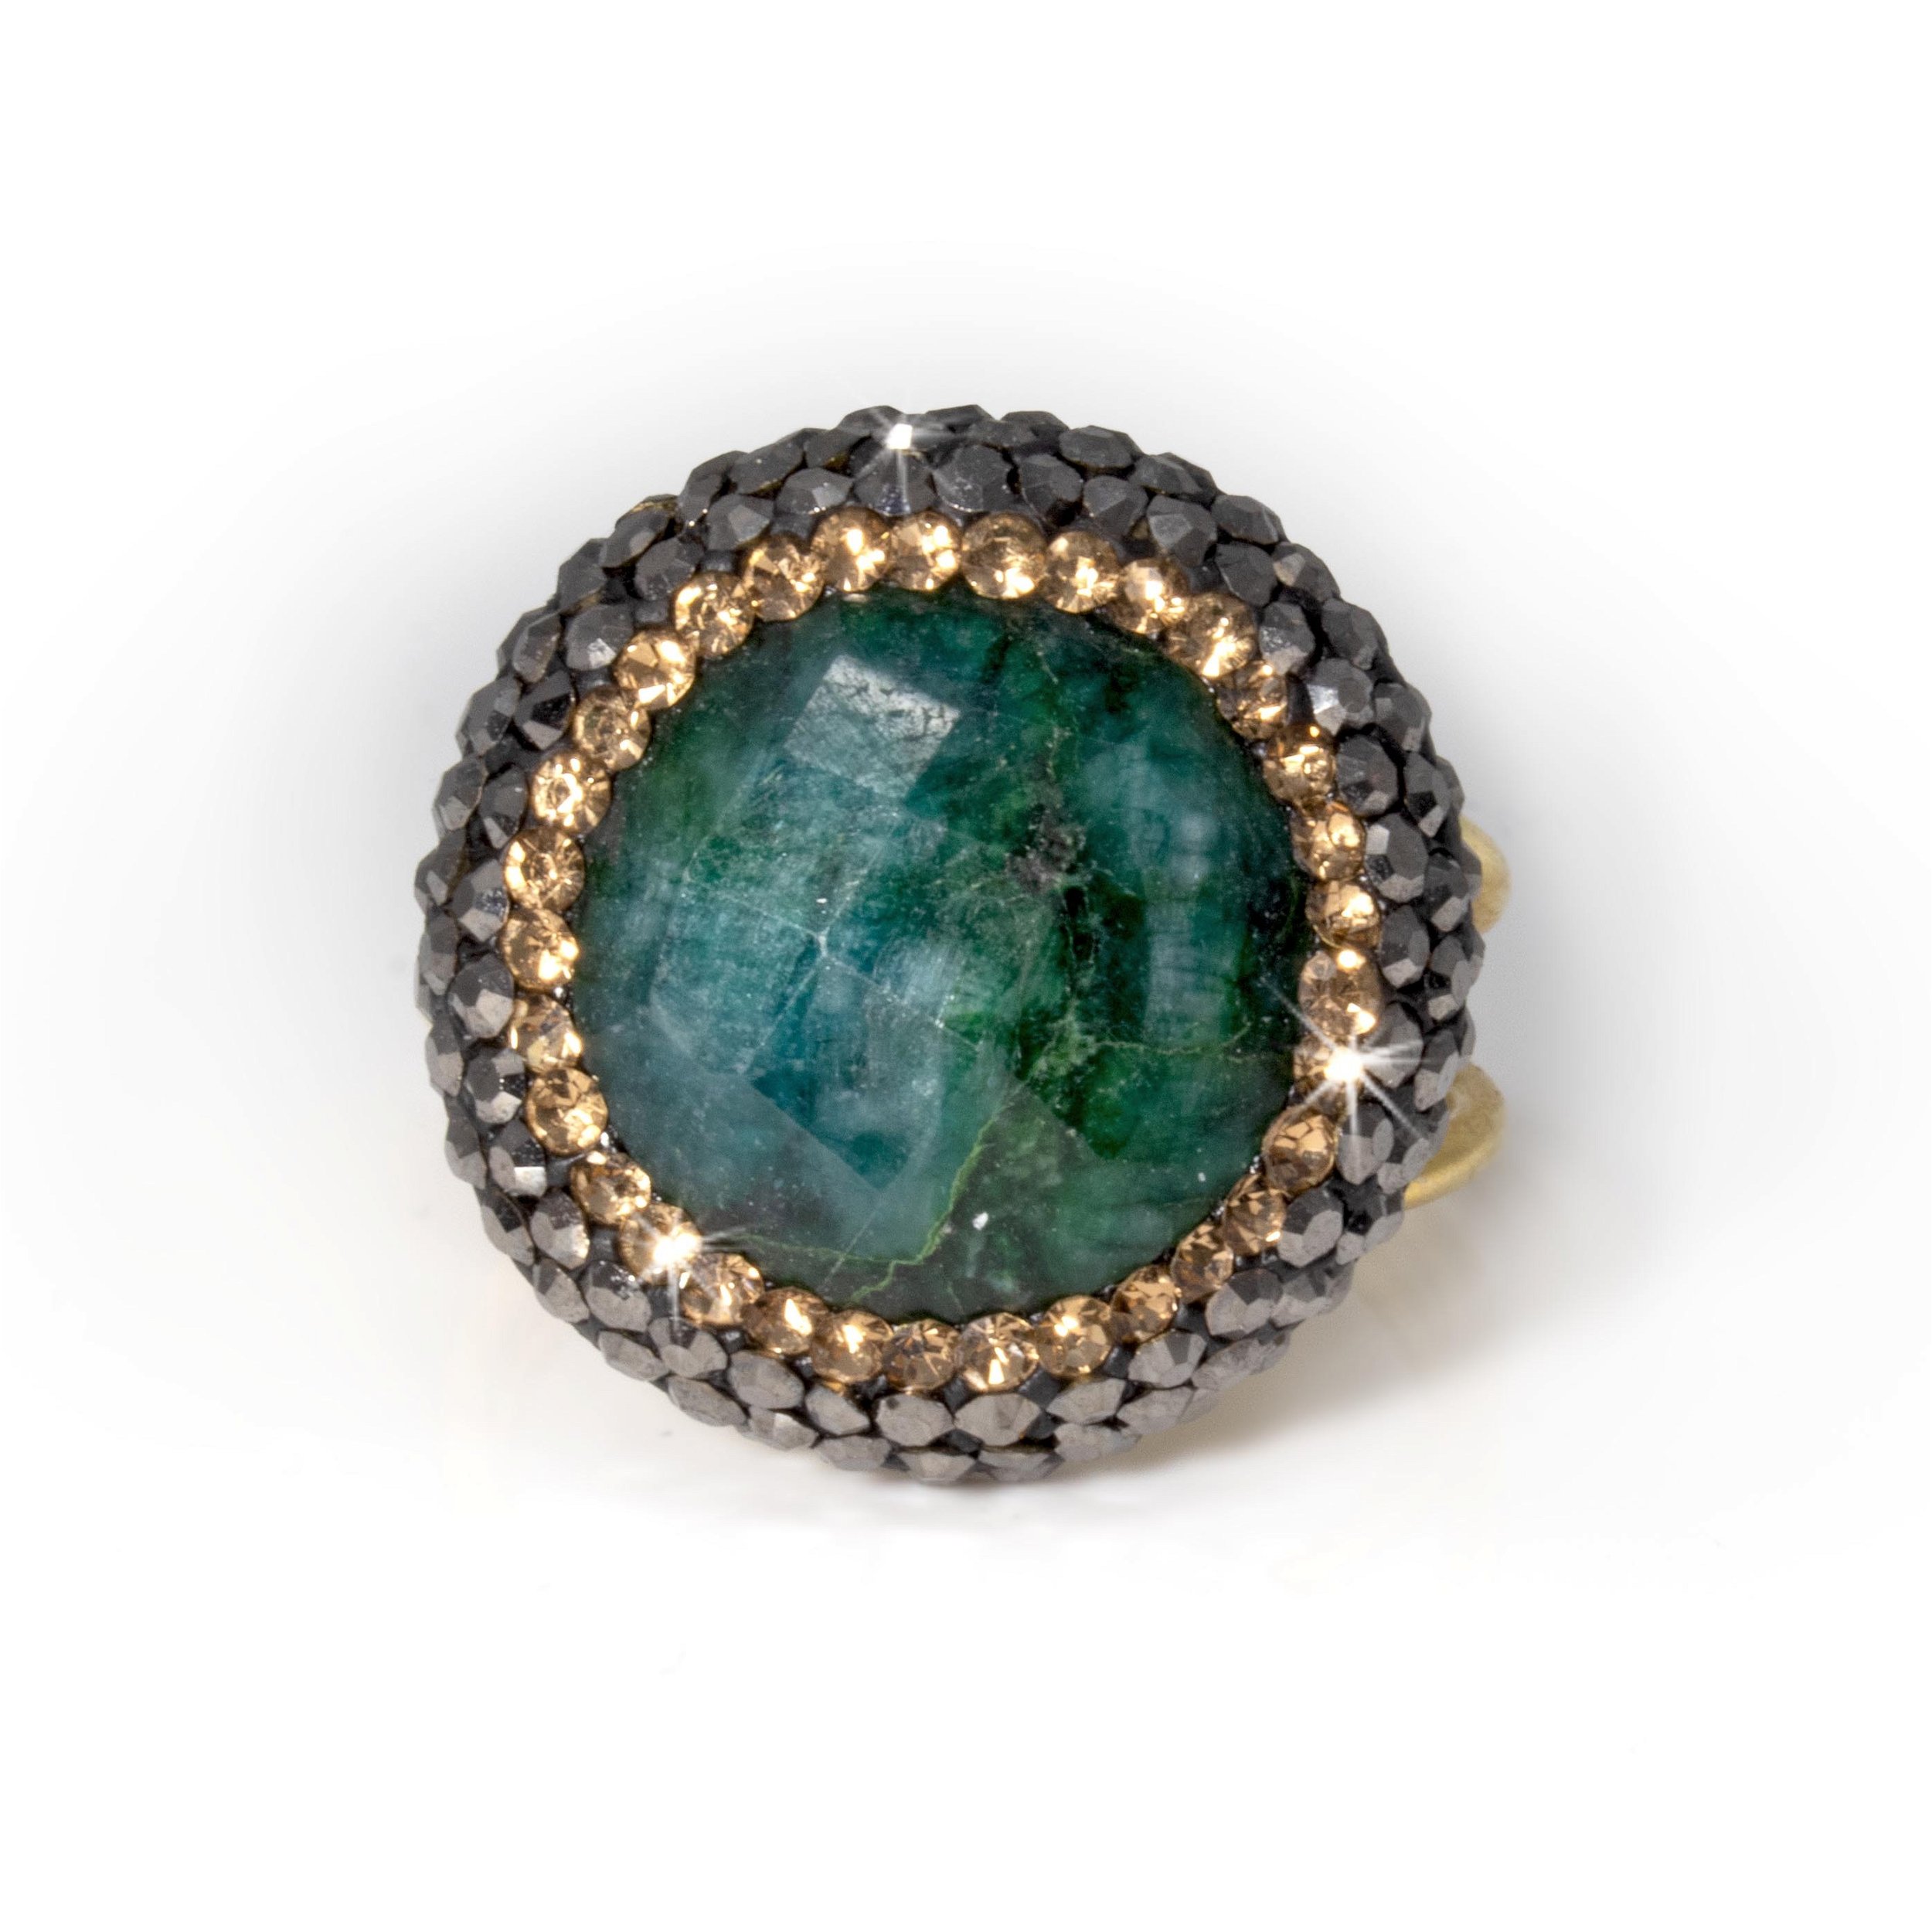 Emerald Ring Size Adjustable - Faceted Oval With Marcasite & Gold Swarovski Crystals & Gold Overlay On Double Band